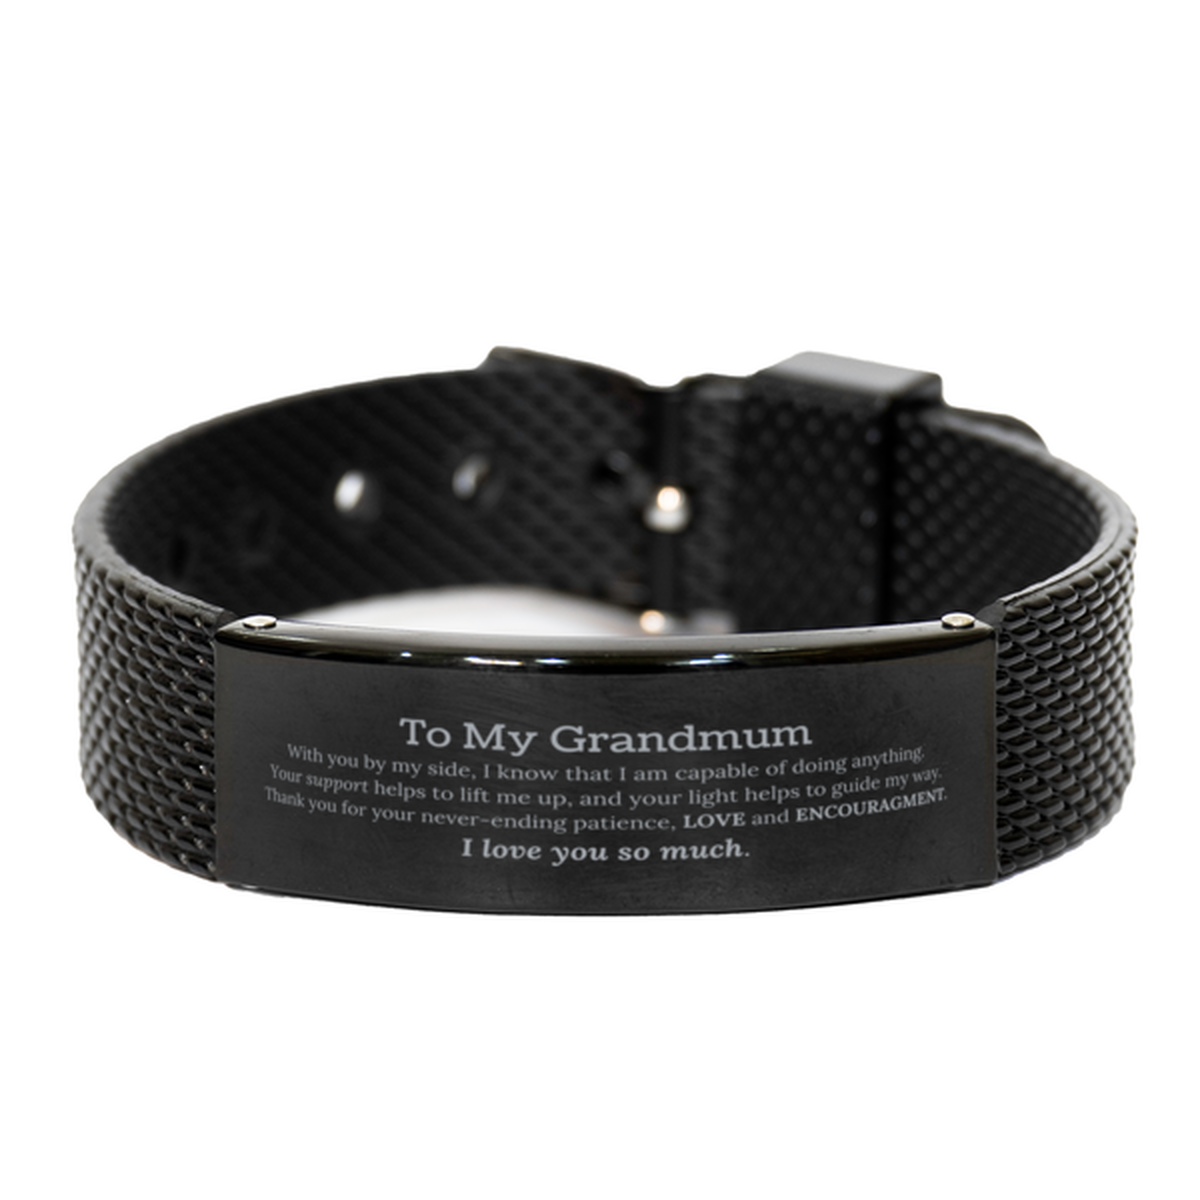 Appreciation Grandmum Black Shark Mesh Bracelet Gifts, To My Grandmum Birthday Christmas Wedding Keepsake Gifts for Grandmum With you by my side, I know that I am capable of doing anything. I love you so much